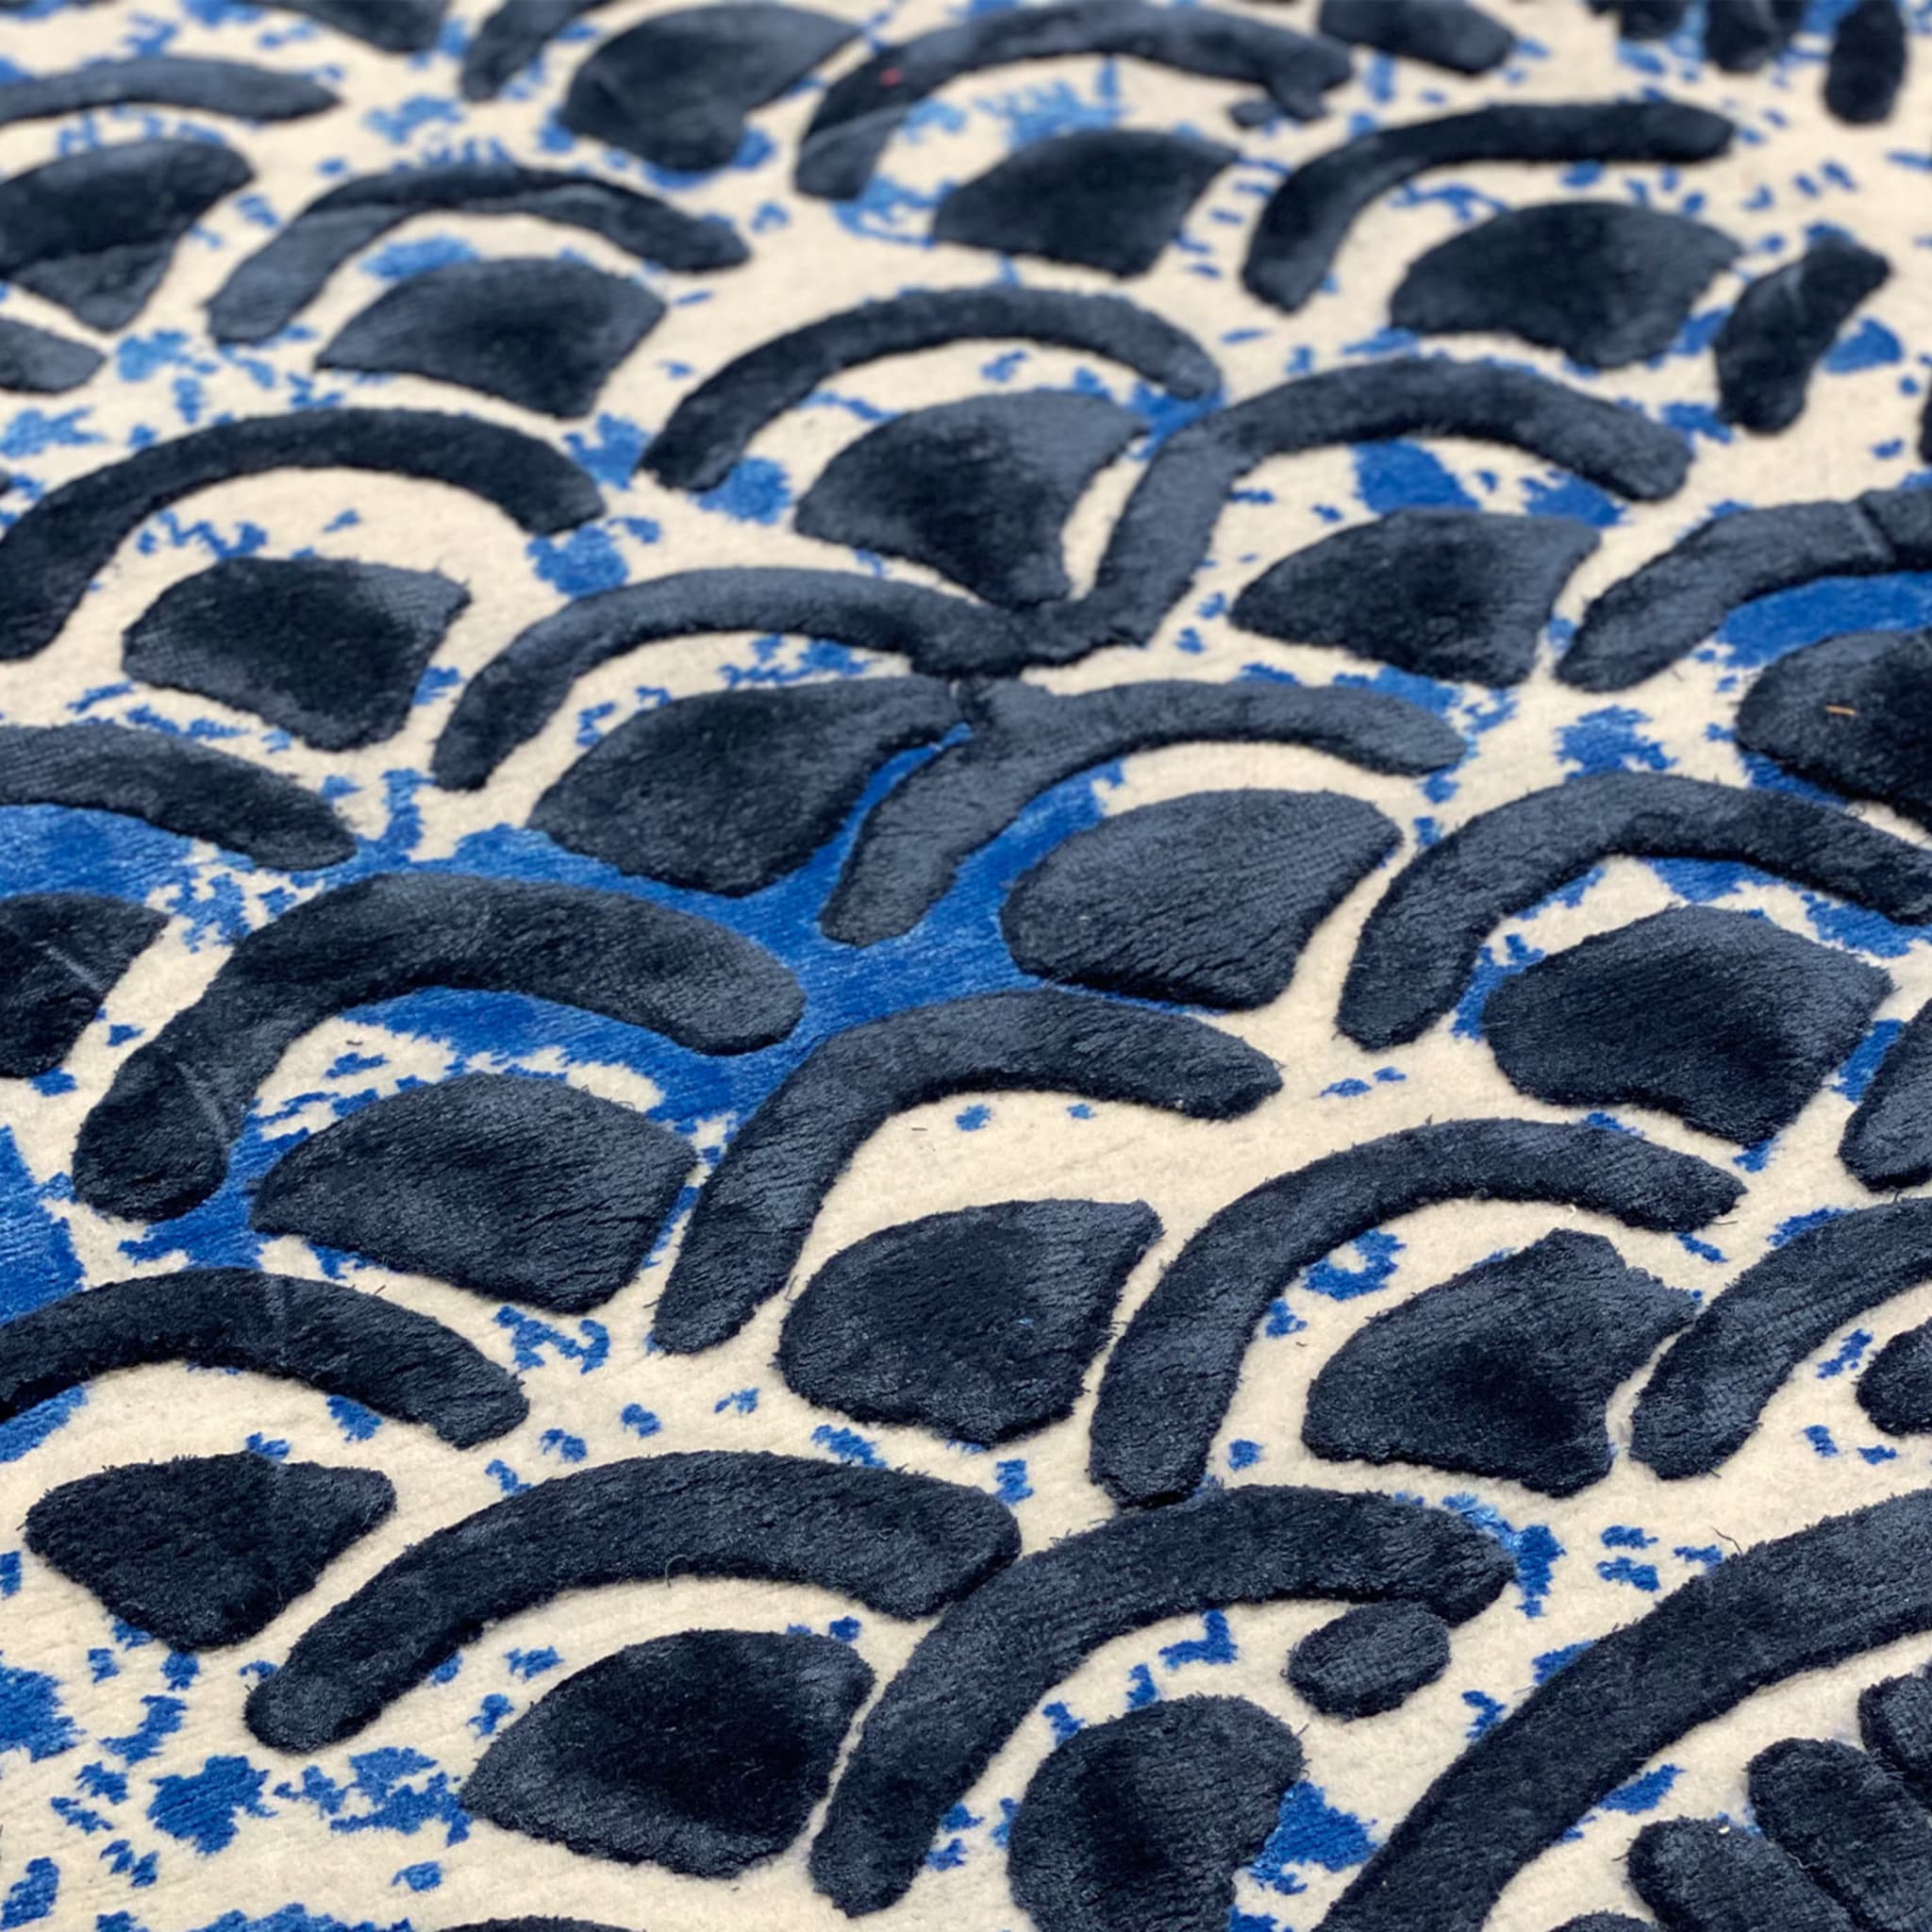 Fish Rug By Paola Navone - Alternative view 1